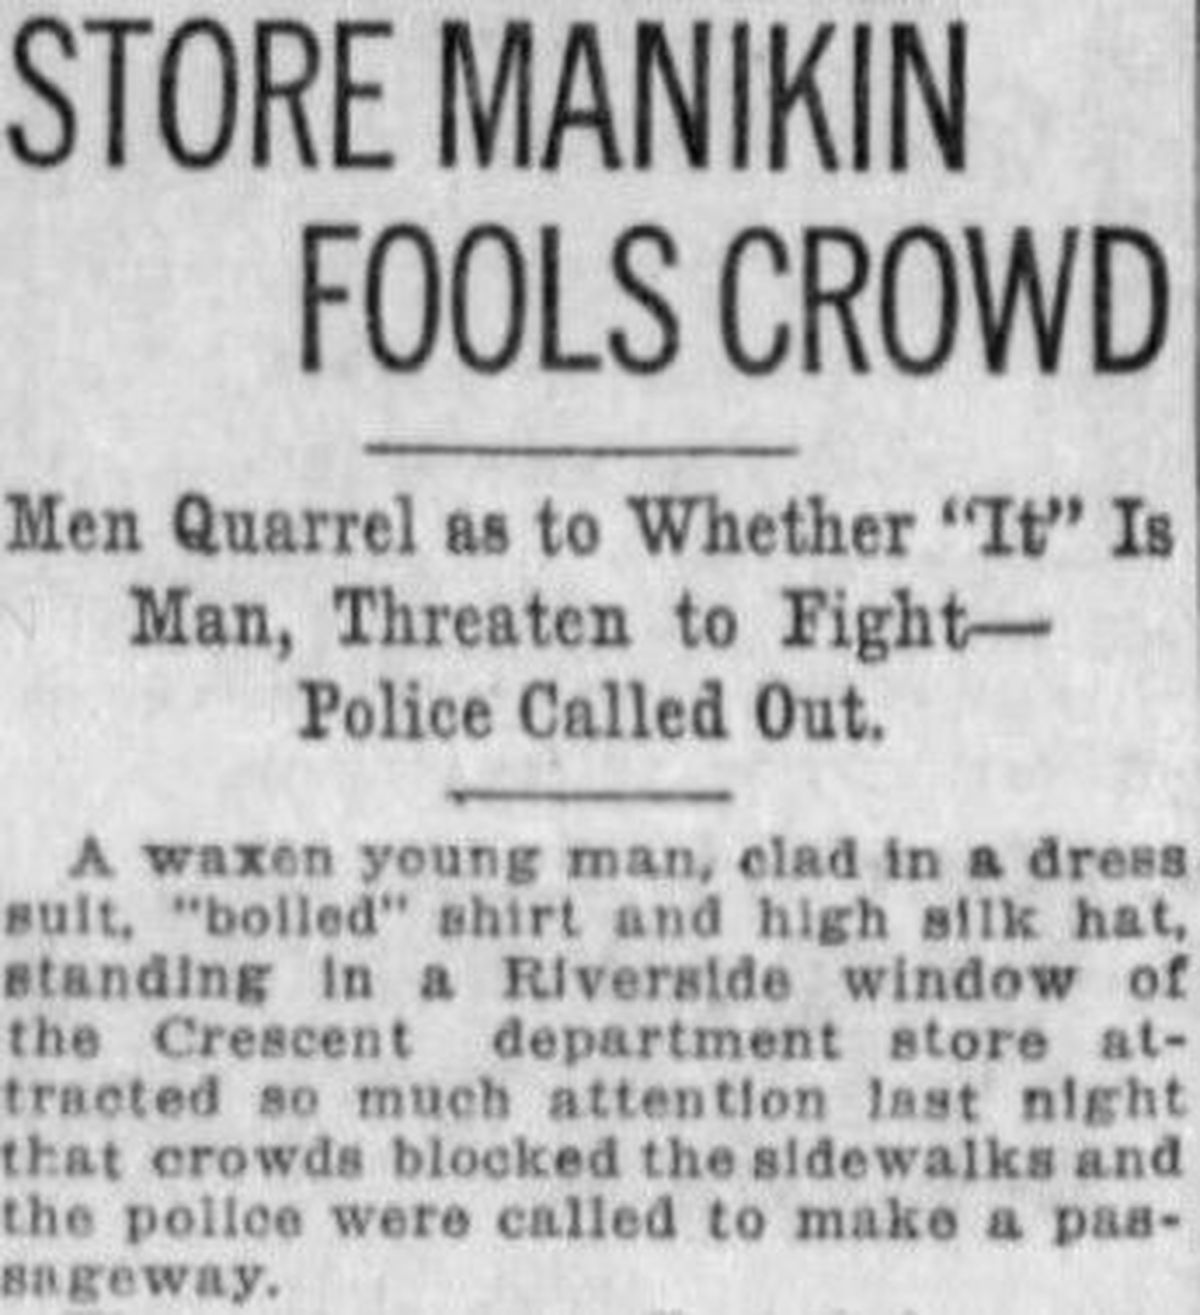 100 years ago in Spokane, someone convinced people that a shop mannequin lives downtown